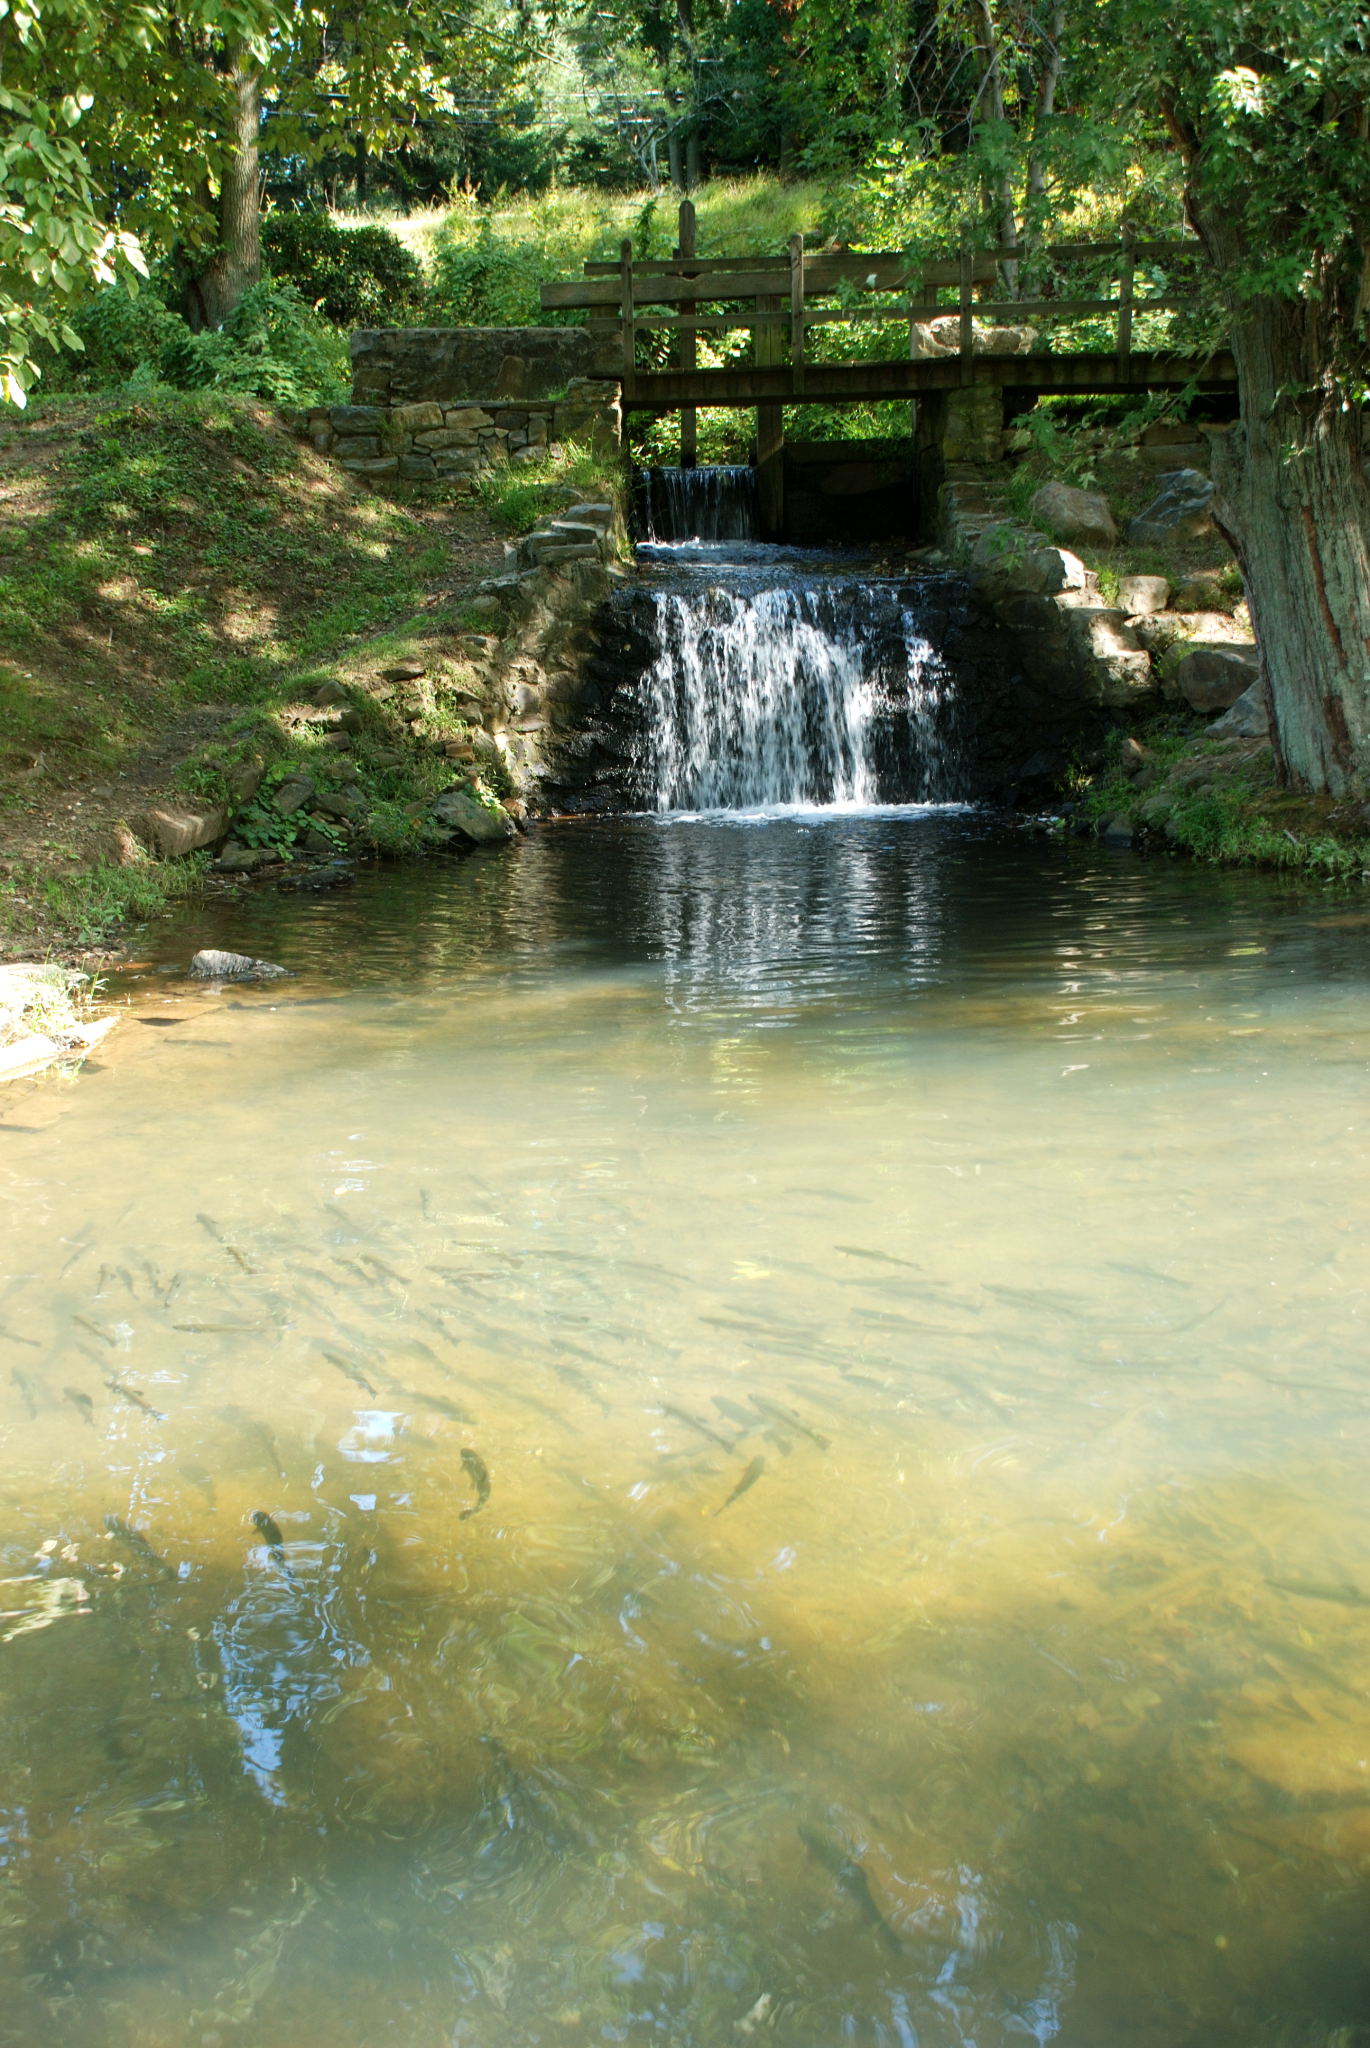 Millrace spillway and trout pond